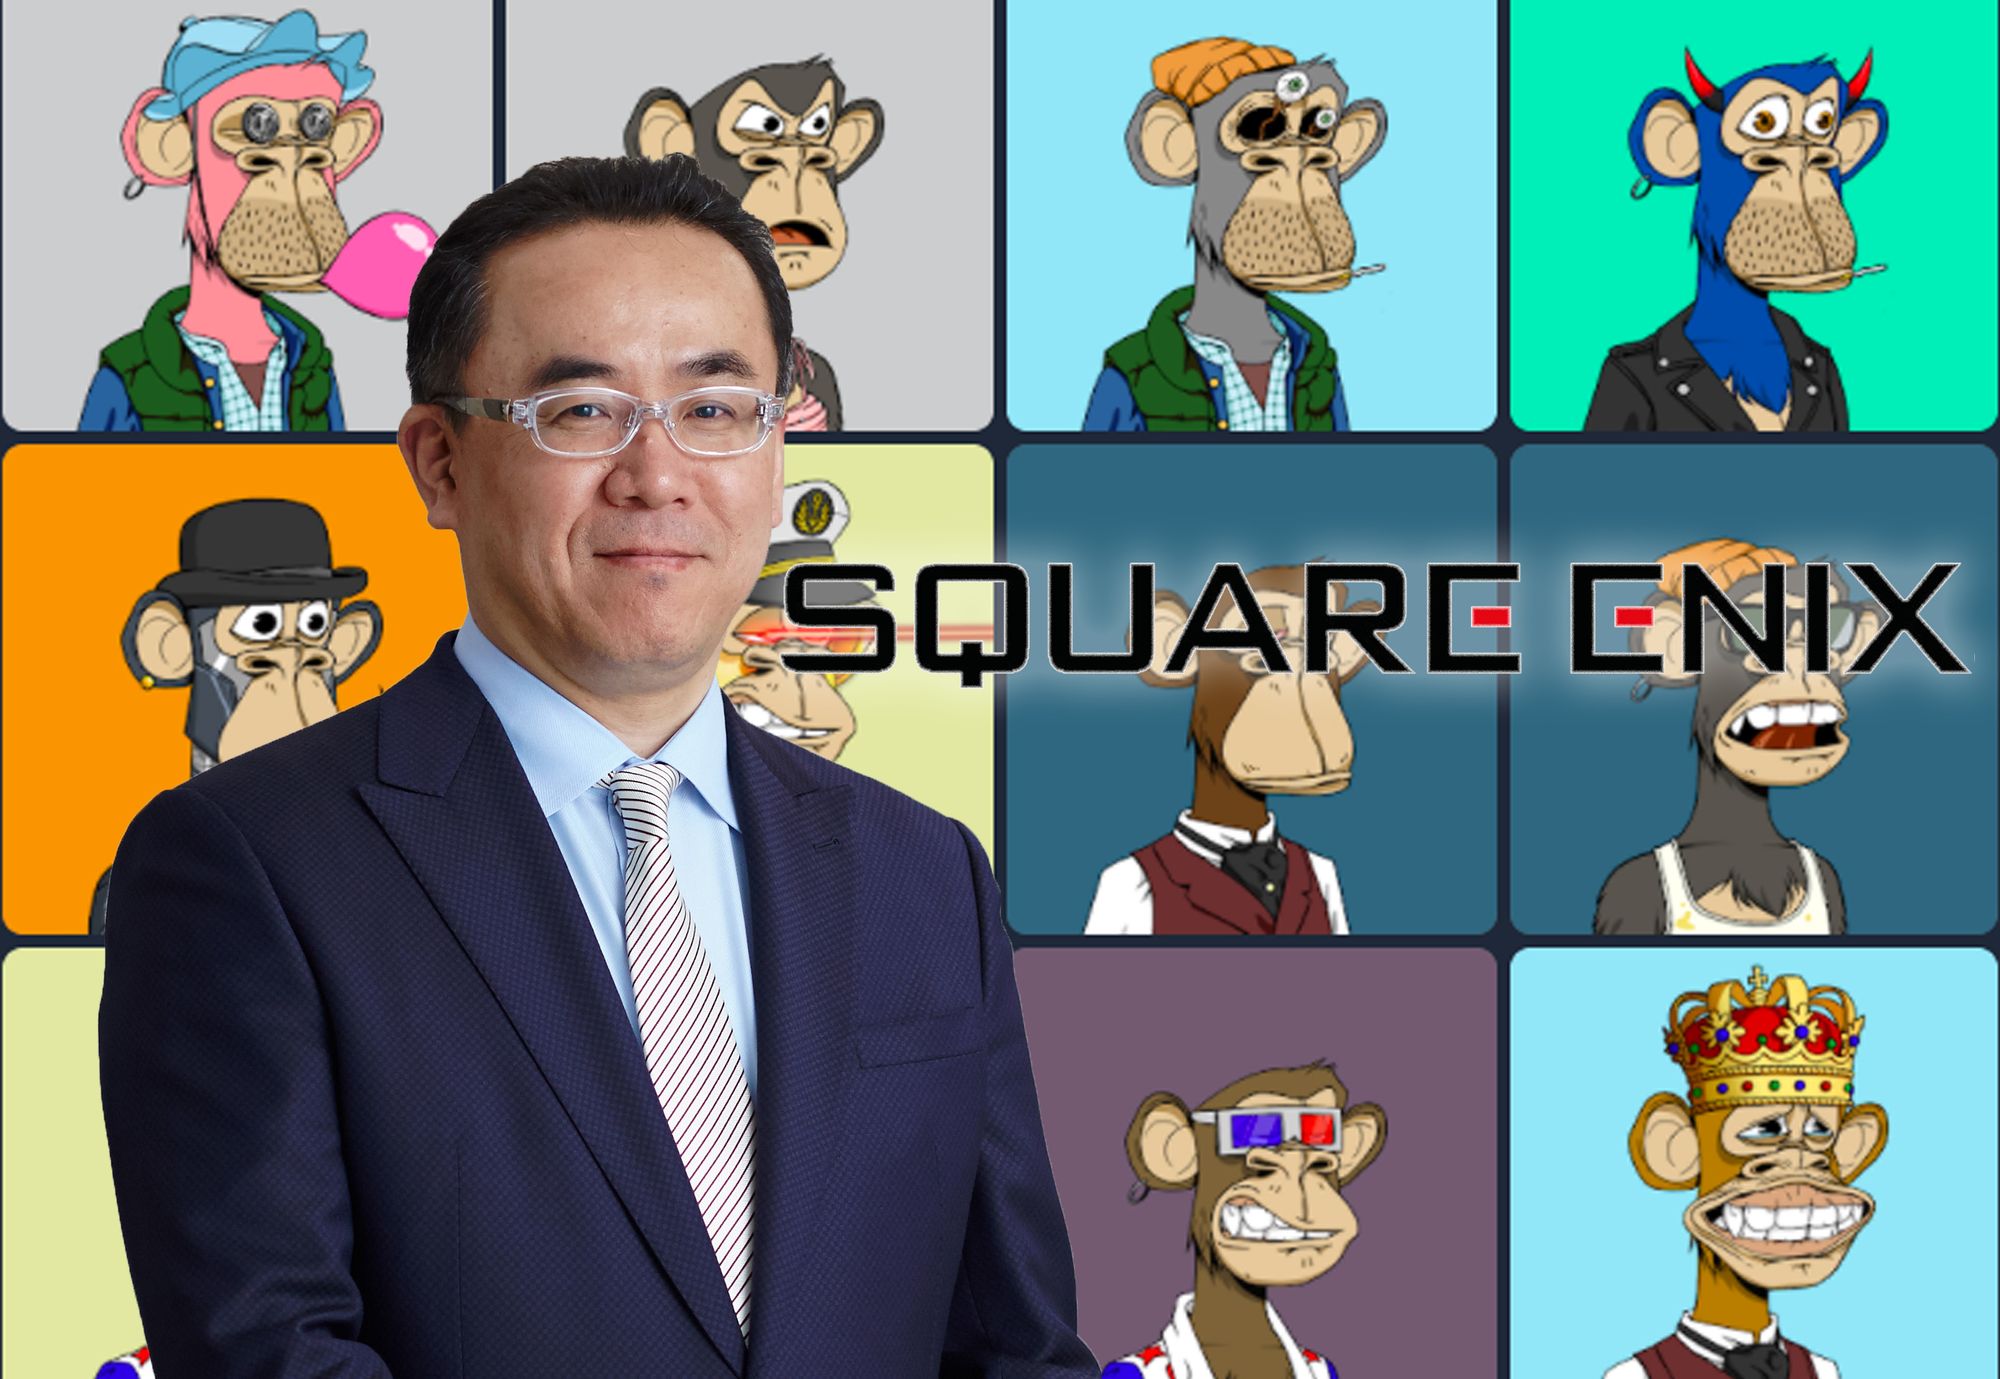 Square Enix Sells Off Gaming Studios In Order To Purchase Rare Ape NFT